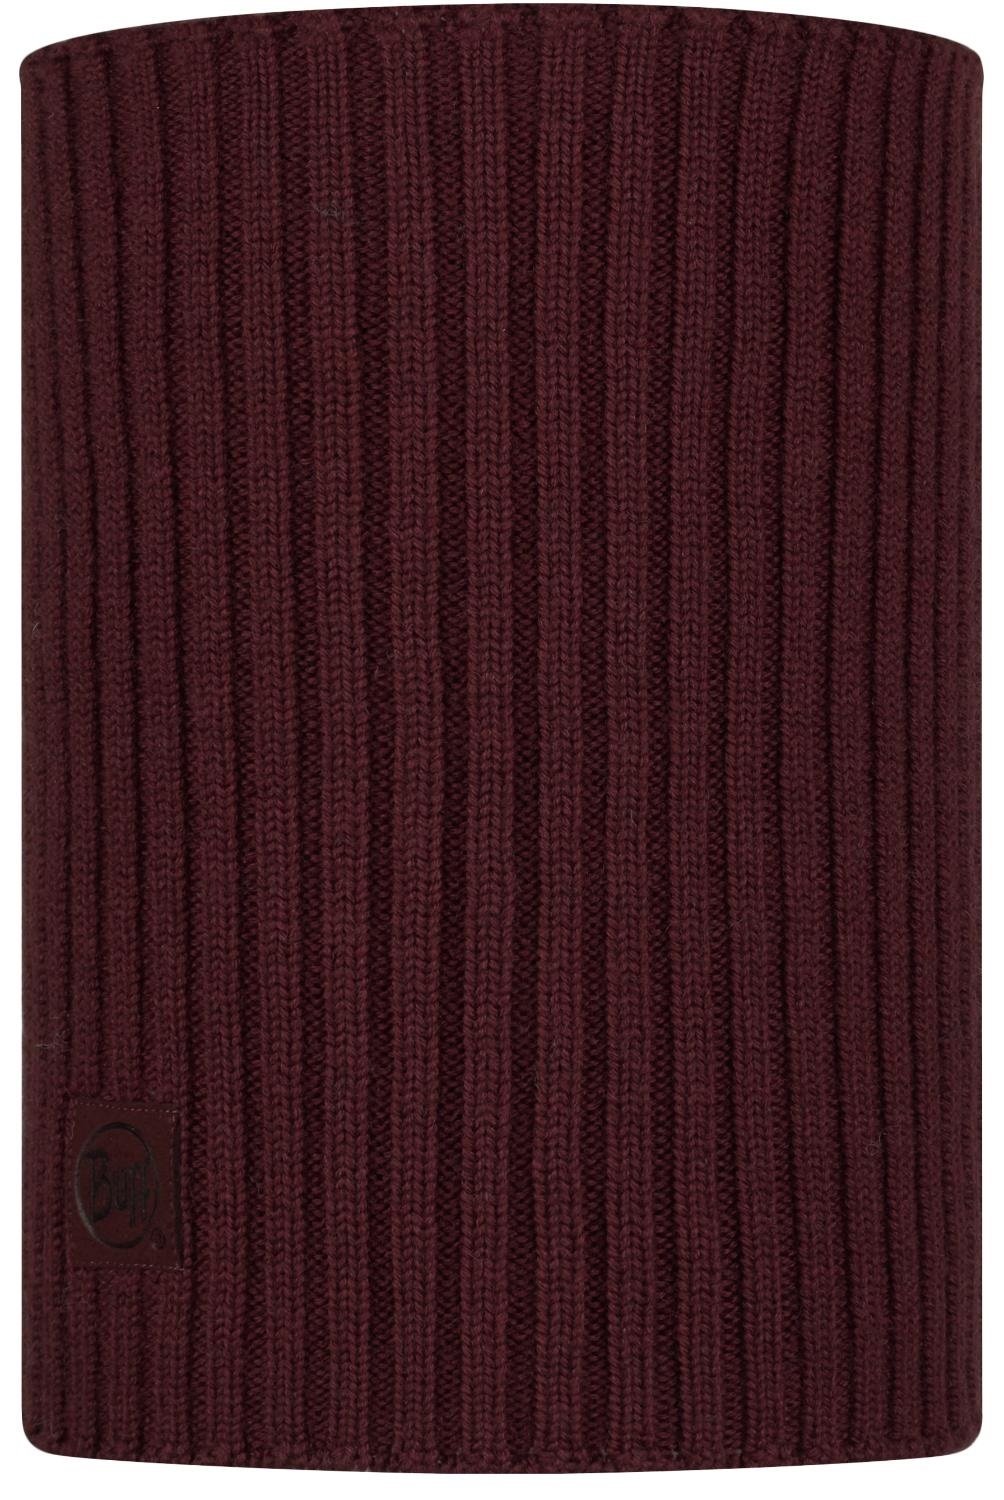 Шарф Buff Knitted Neckwarmer Comfort Norval Maroon, US:one size, 124244.632.10.00